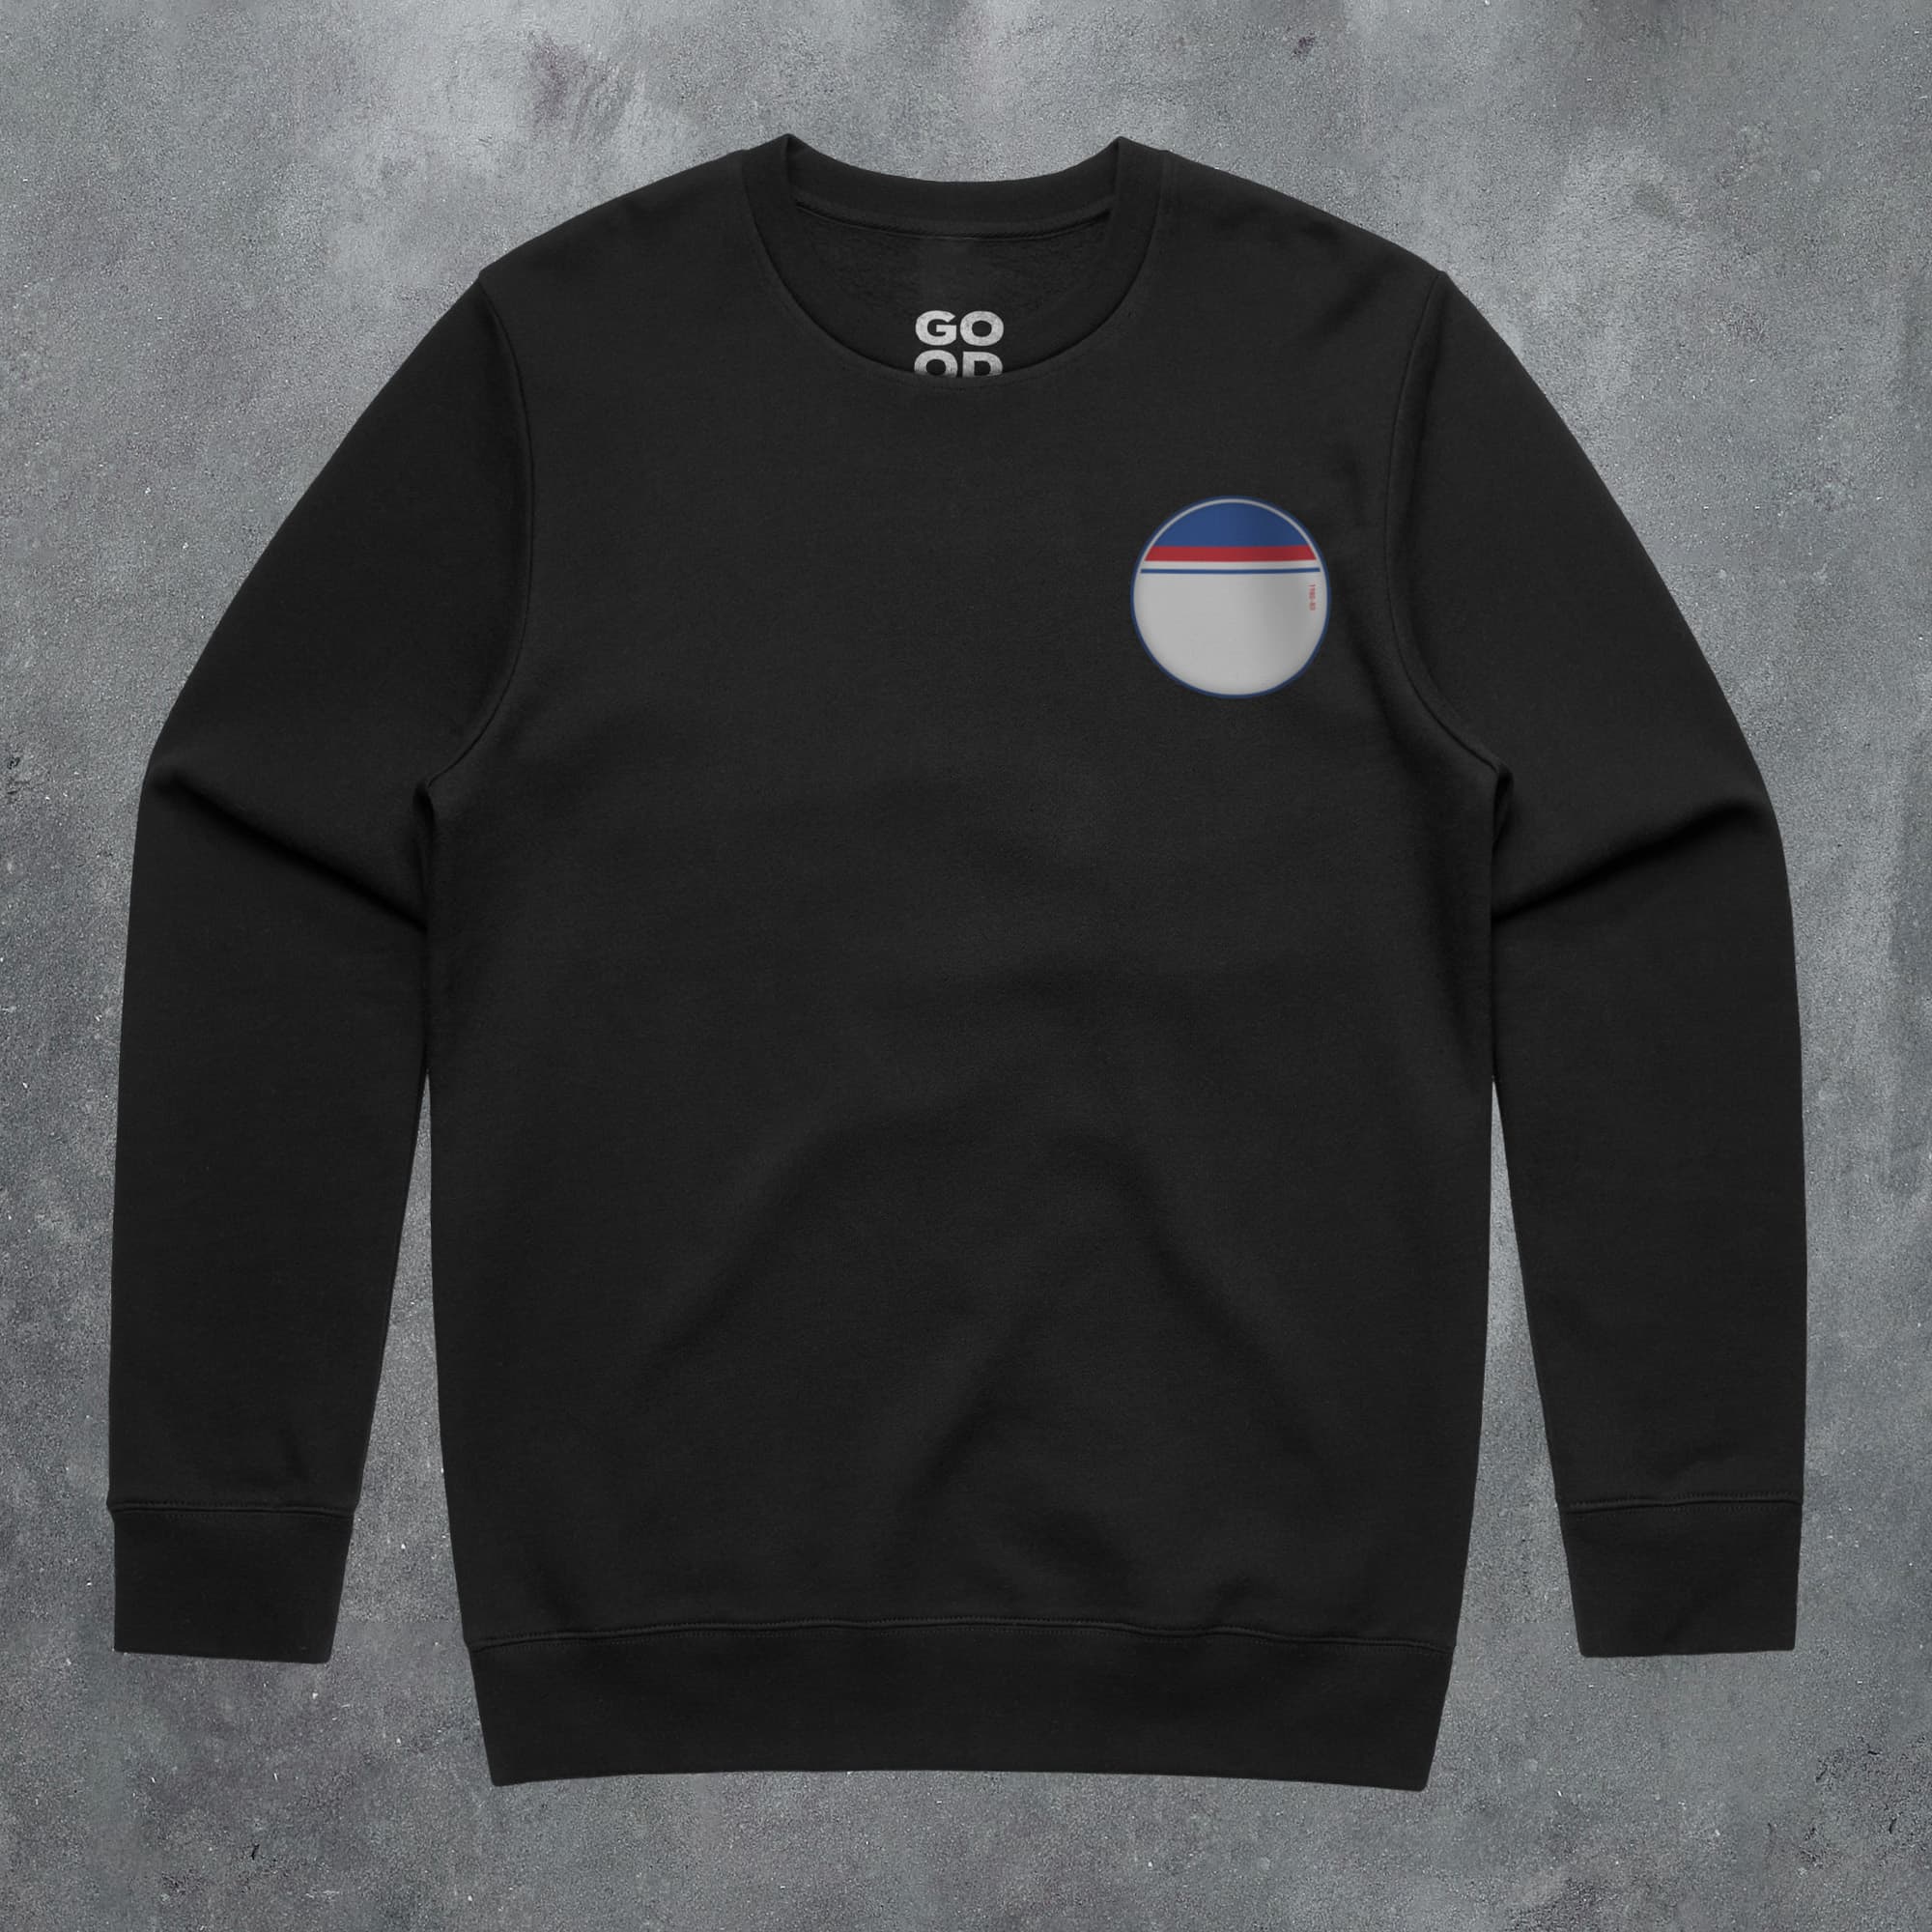 a black sweatshirt with a round logo on the chest